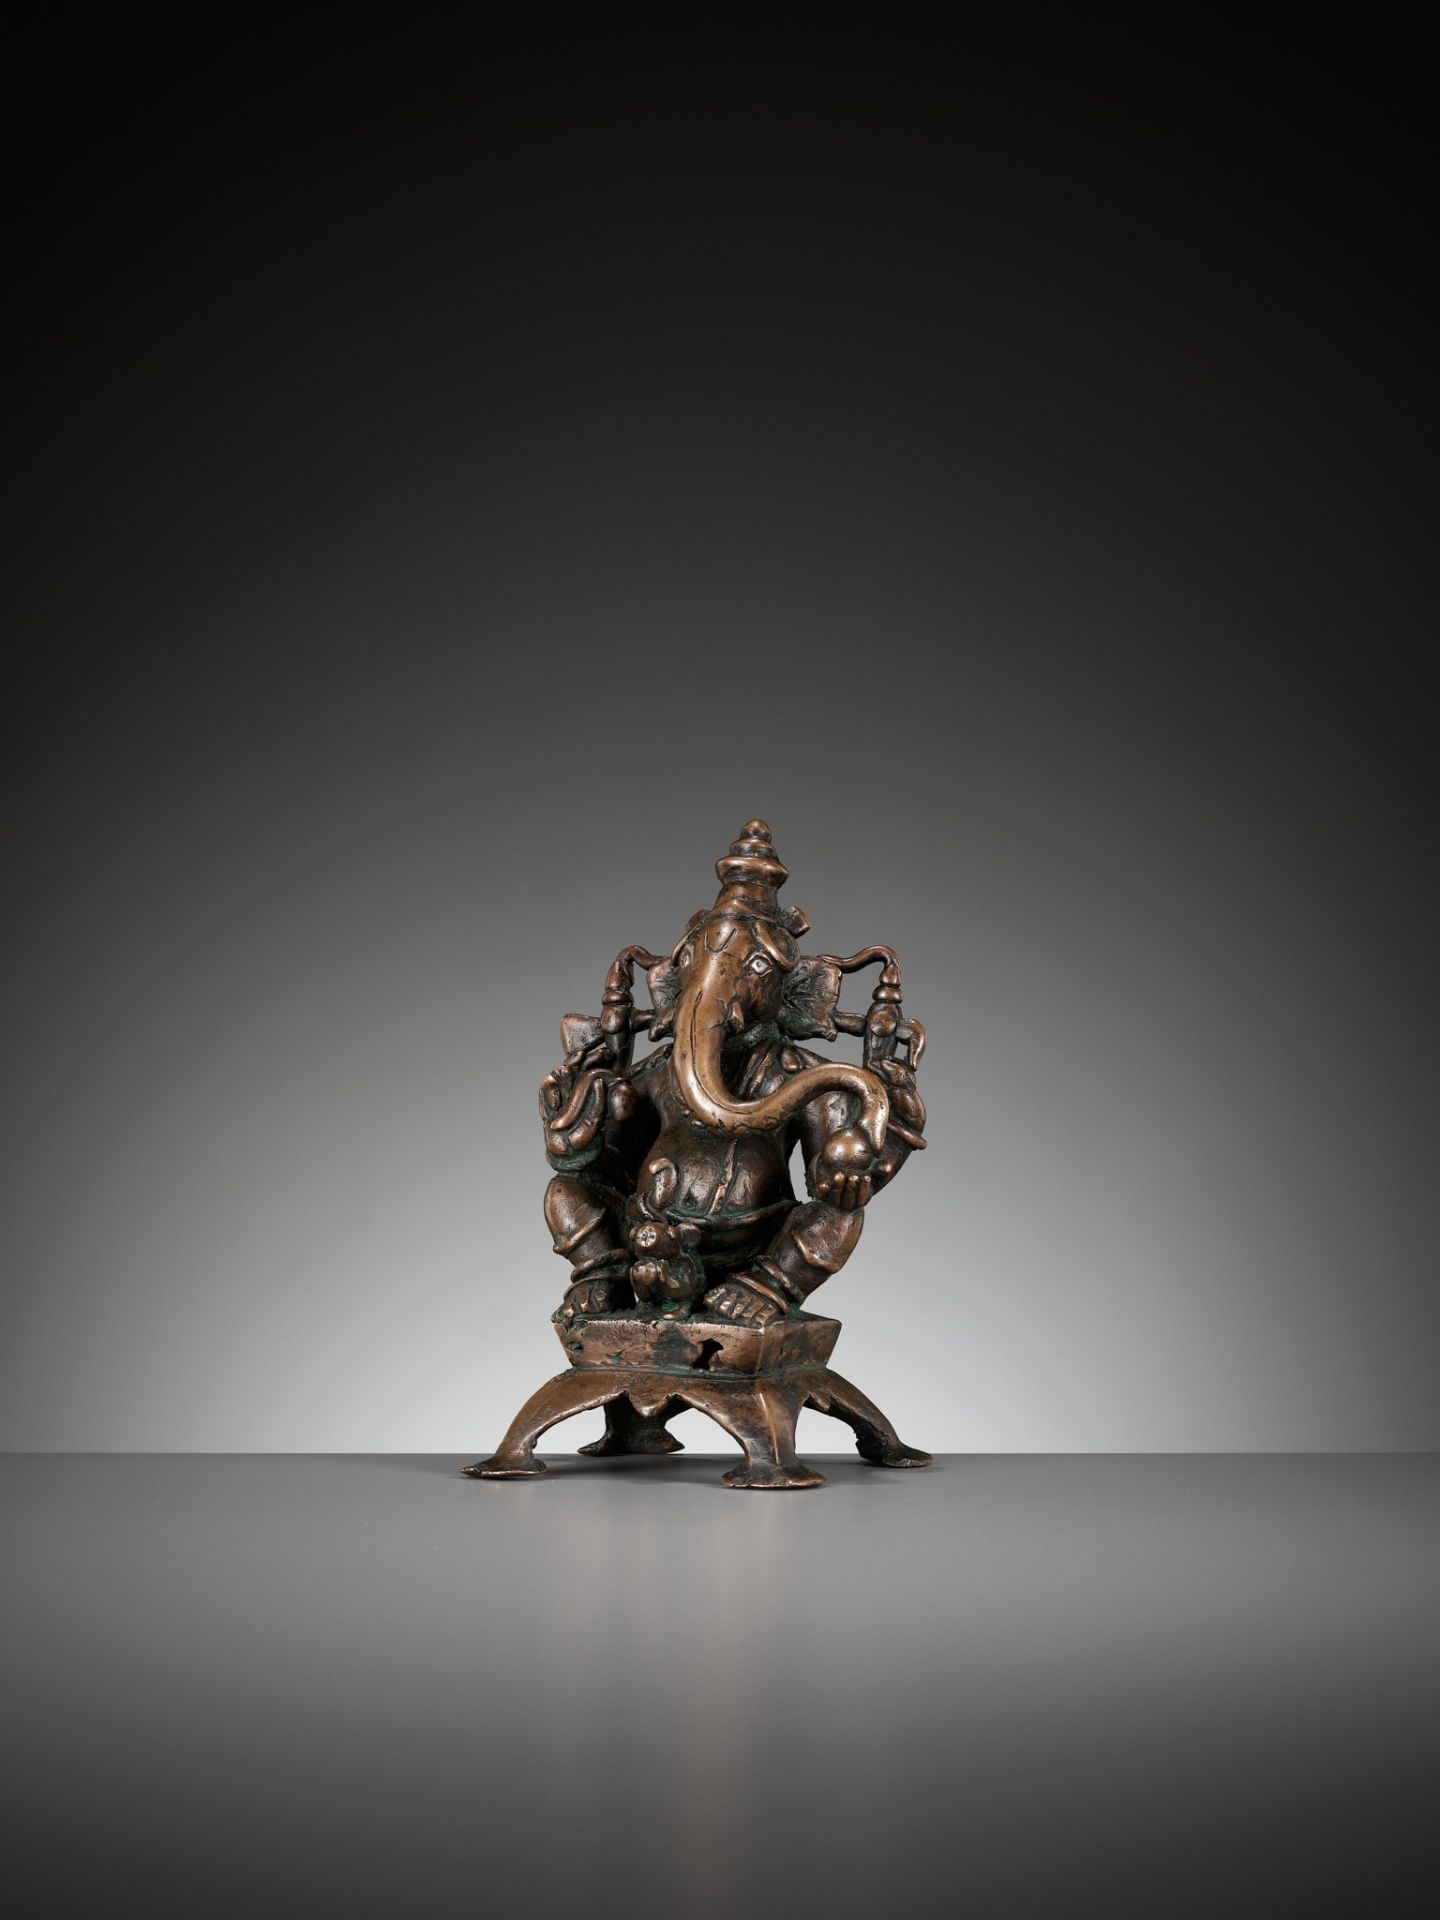 A SILVER-INLAID COPPER ALLOY FIGURE OF GANESHA, SOUTH INDIA, C. 1650-1750 - Image 6 of 12